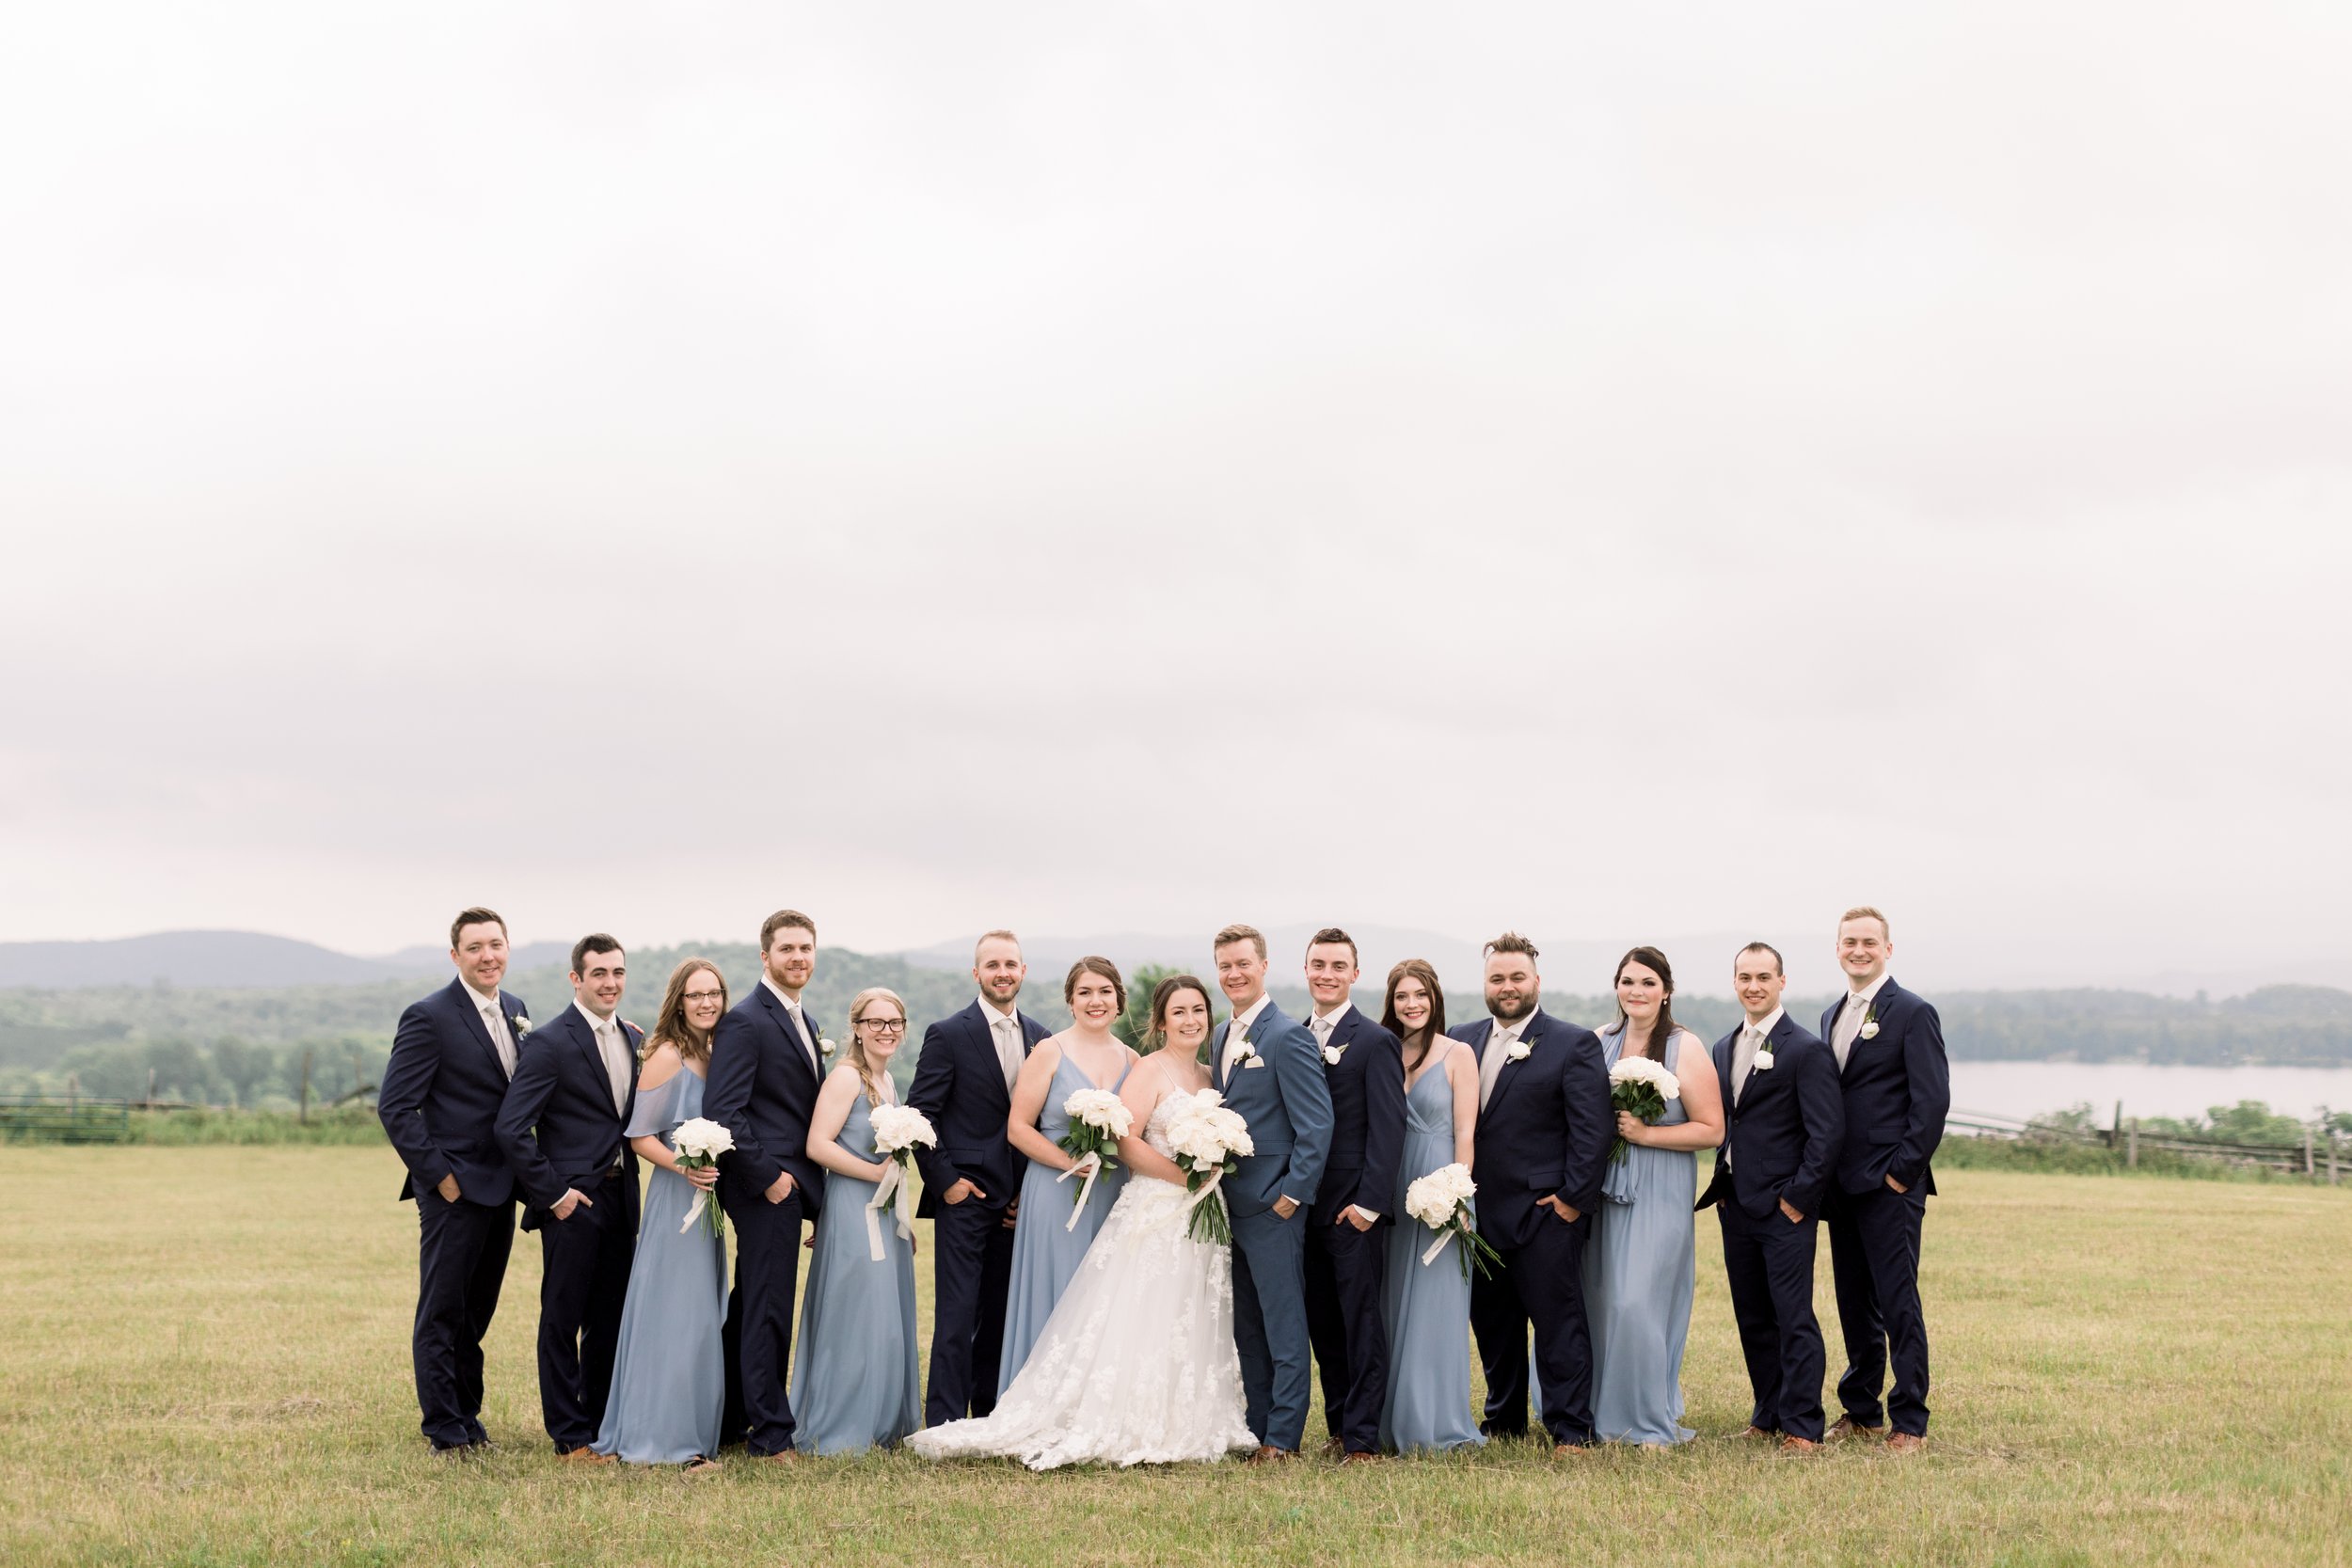  Wedding party portrait in front of a lake in Boulter, Ontario by Chelsea Mason Photography. outside wedding party portraits Ontario #chelseamasonphotography #chelseamasonweddings #Ontarioweddings #Boulterweddingphotographer #laceweddinggown 